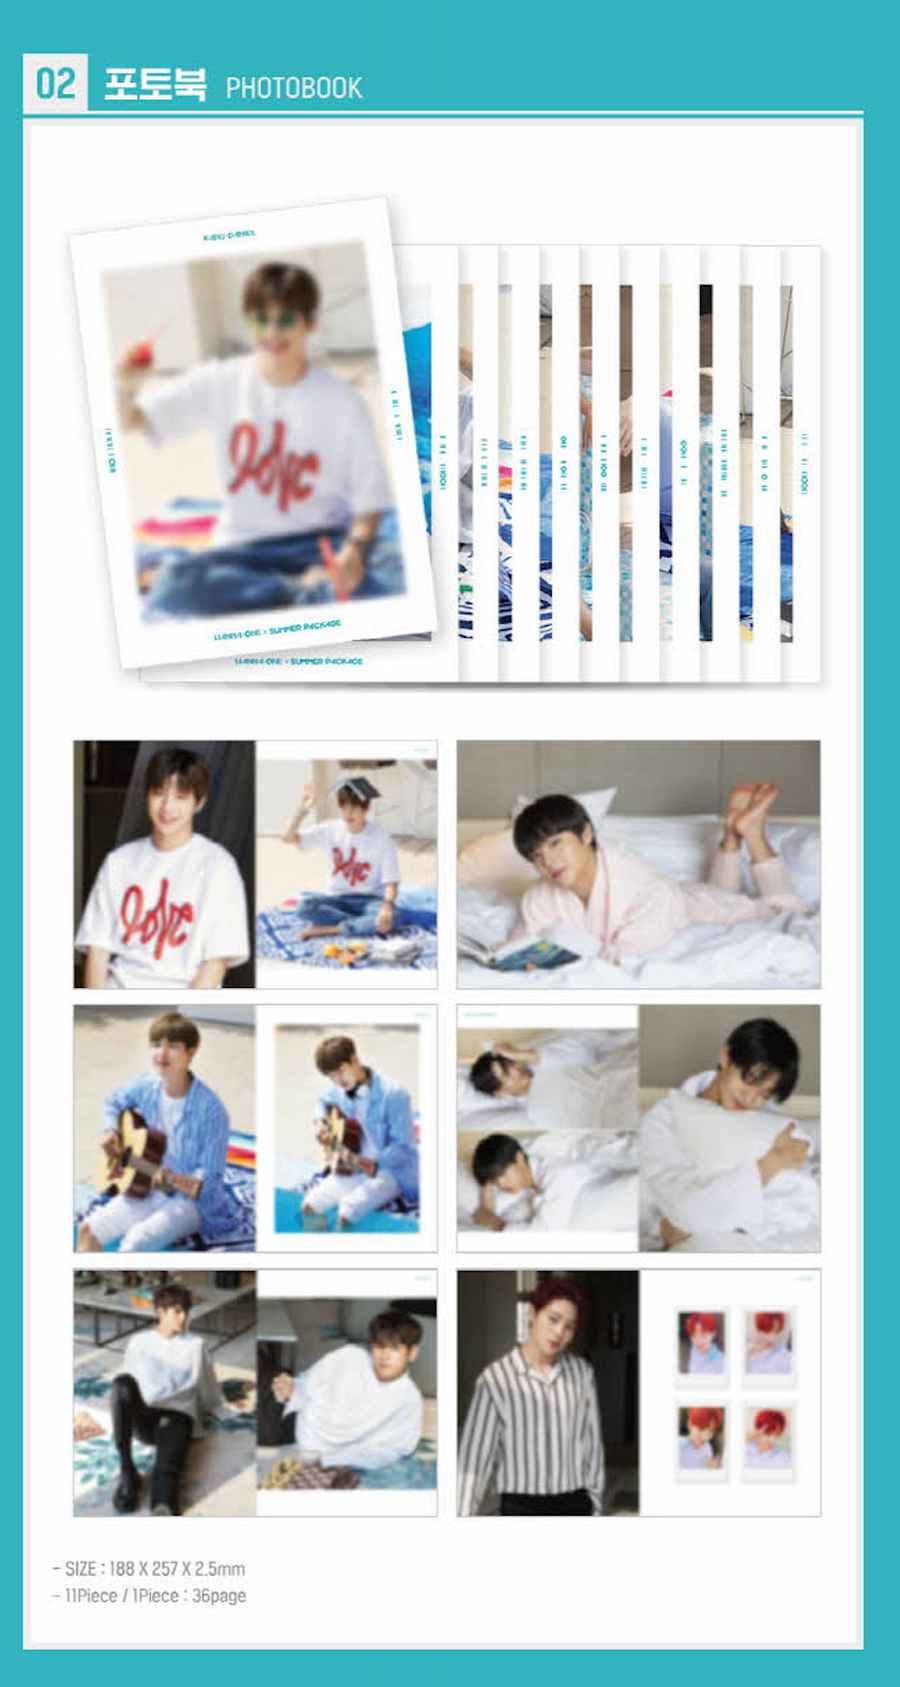 Wanna One X Summer Package